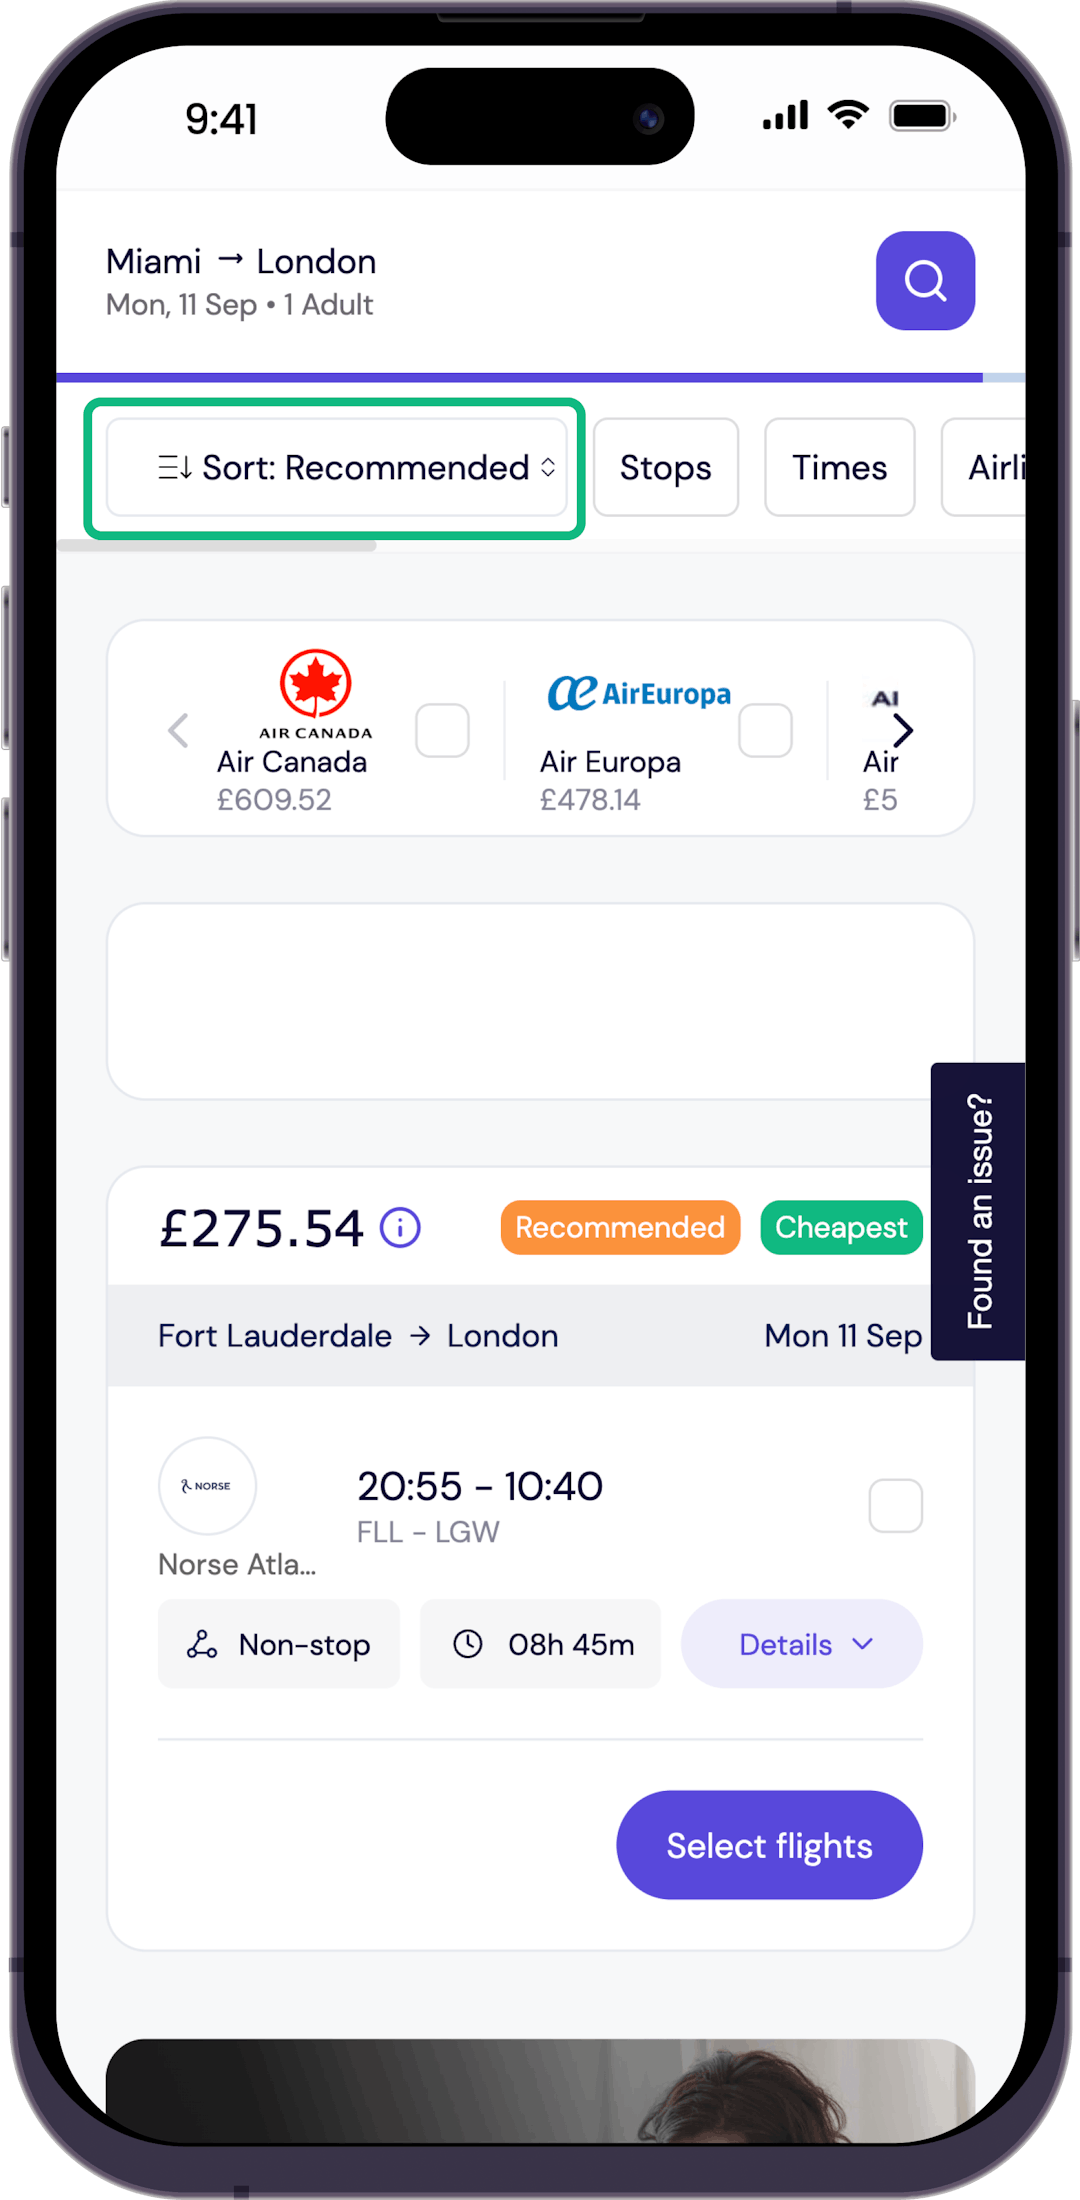 Step 3 - Use our filters to select your cheapest flight